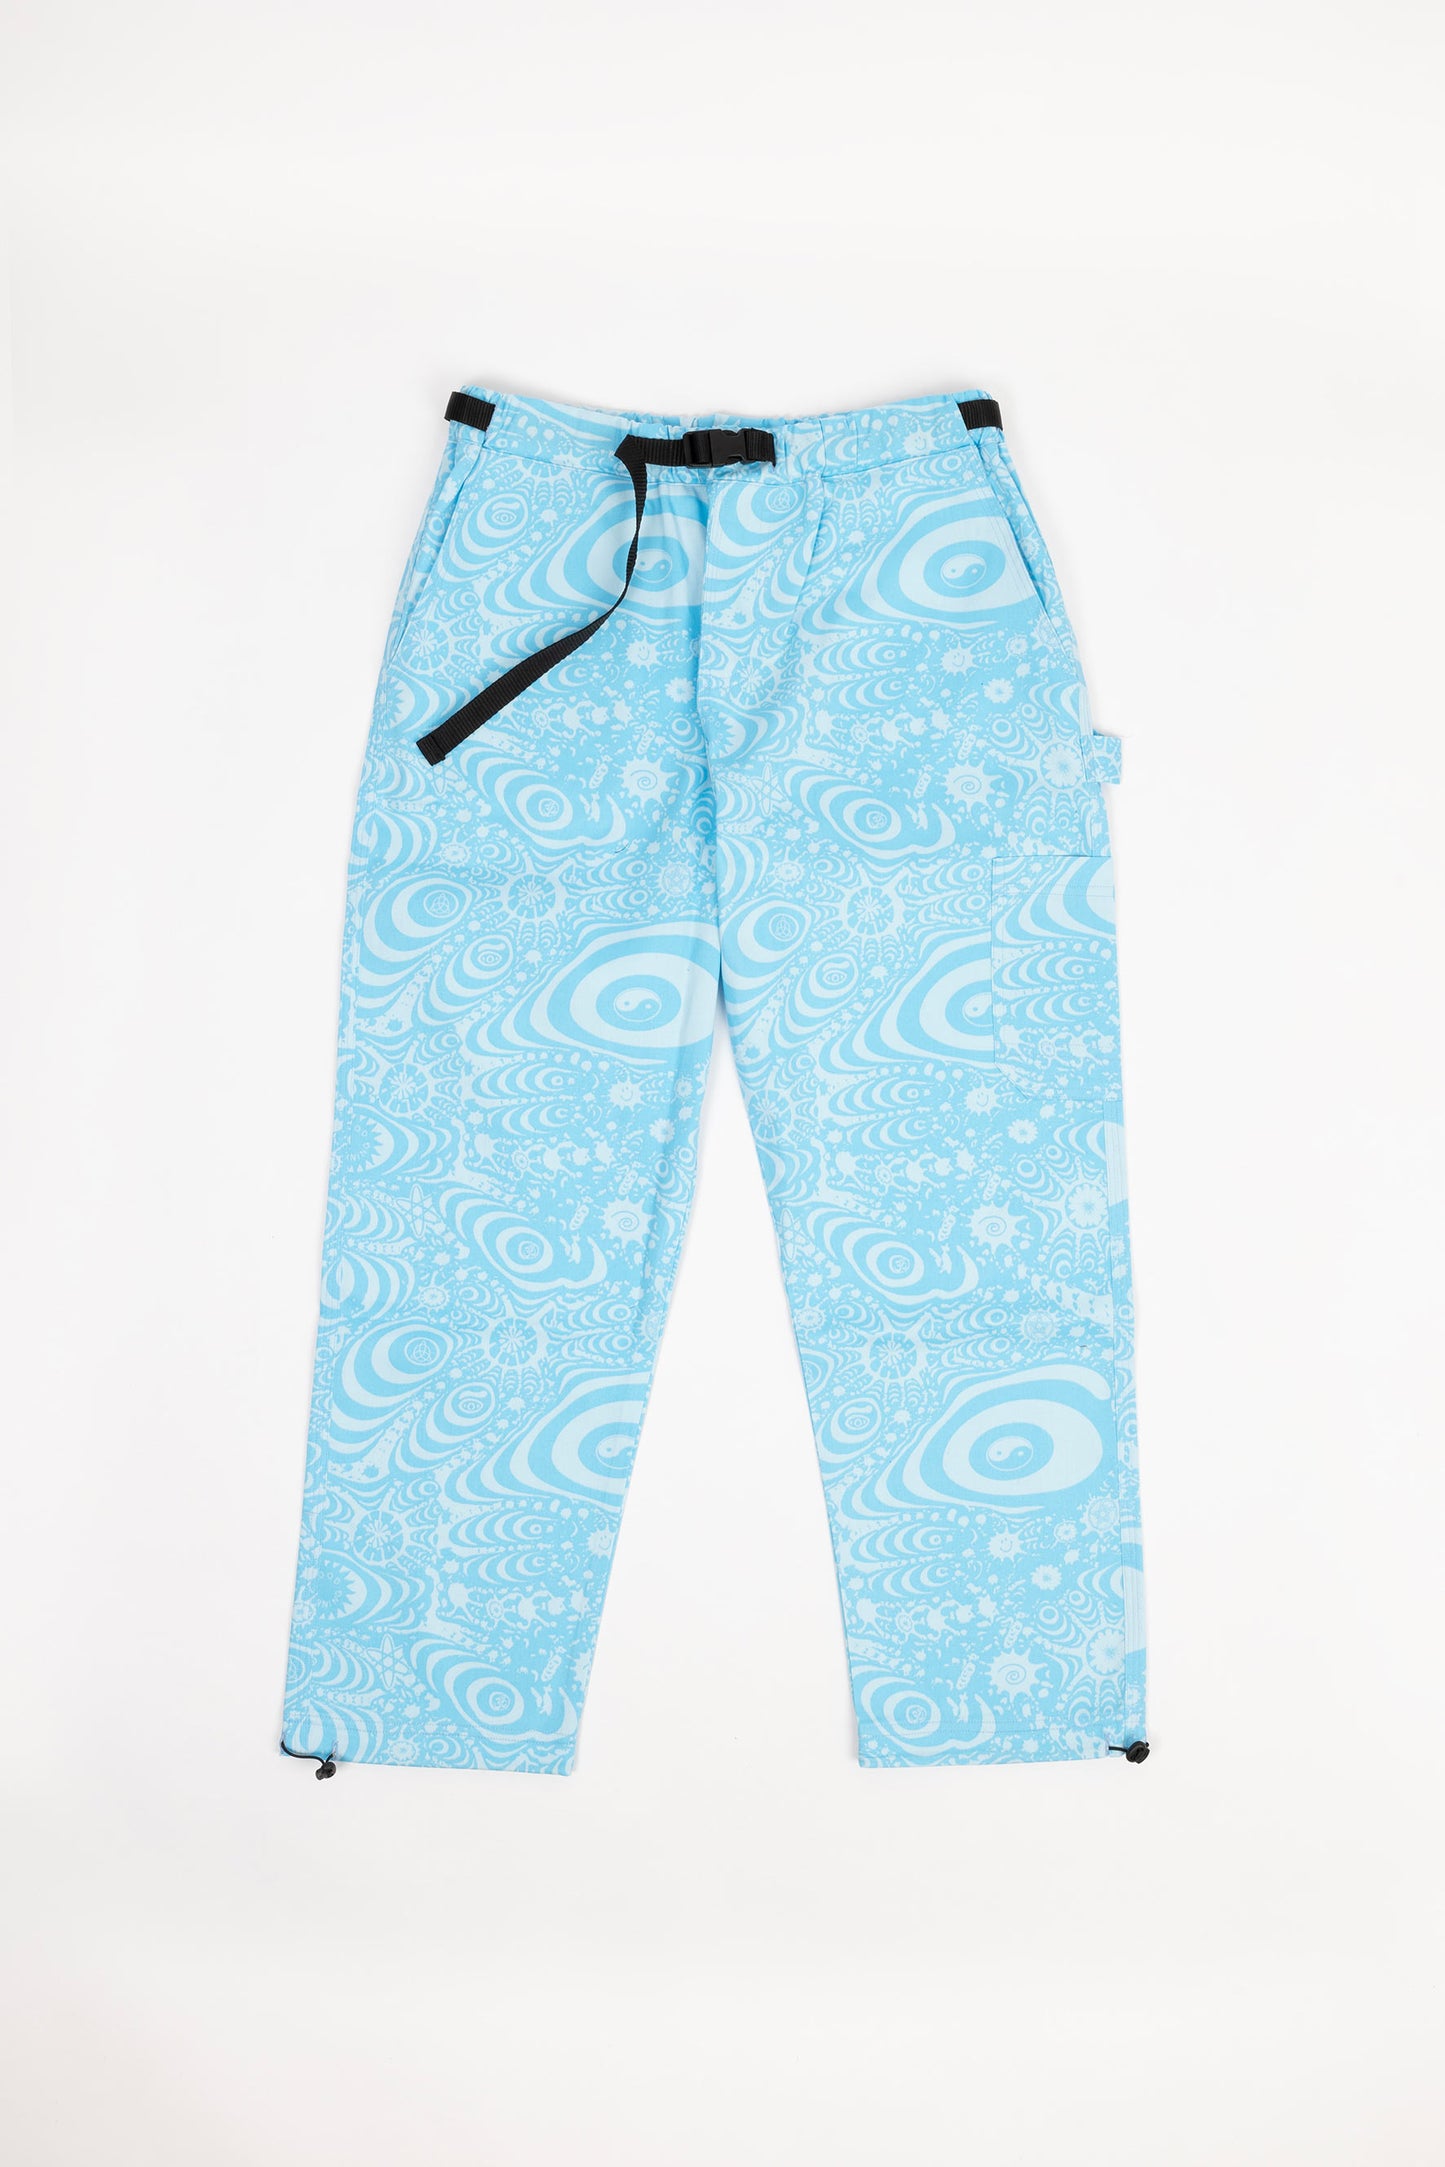 Workers Pant – Knowhere Blue